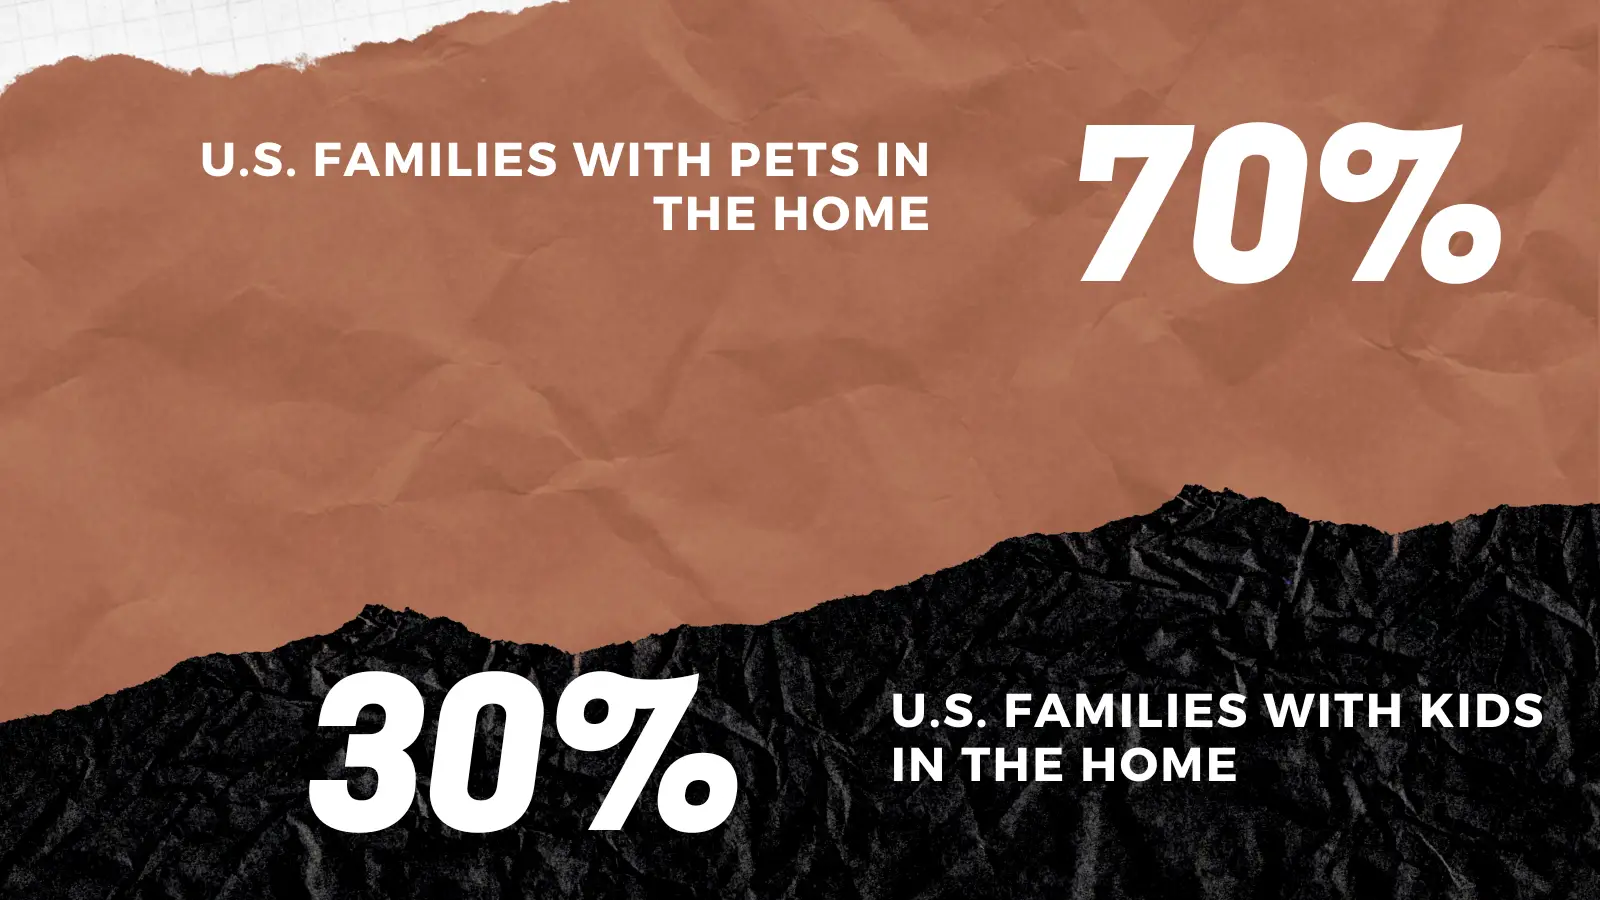 70% of u.s. homes have pets, only 30% have kids - veterinary care access graphic